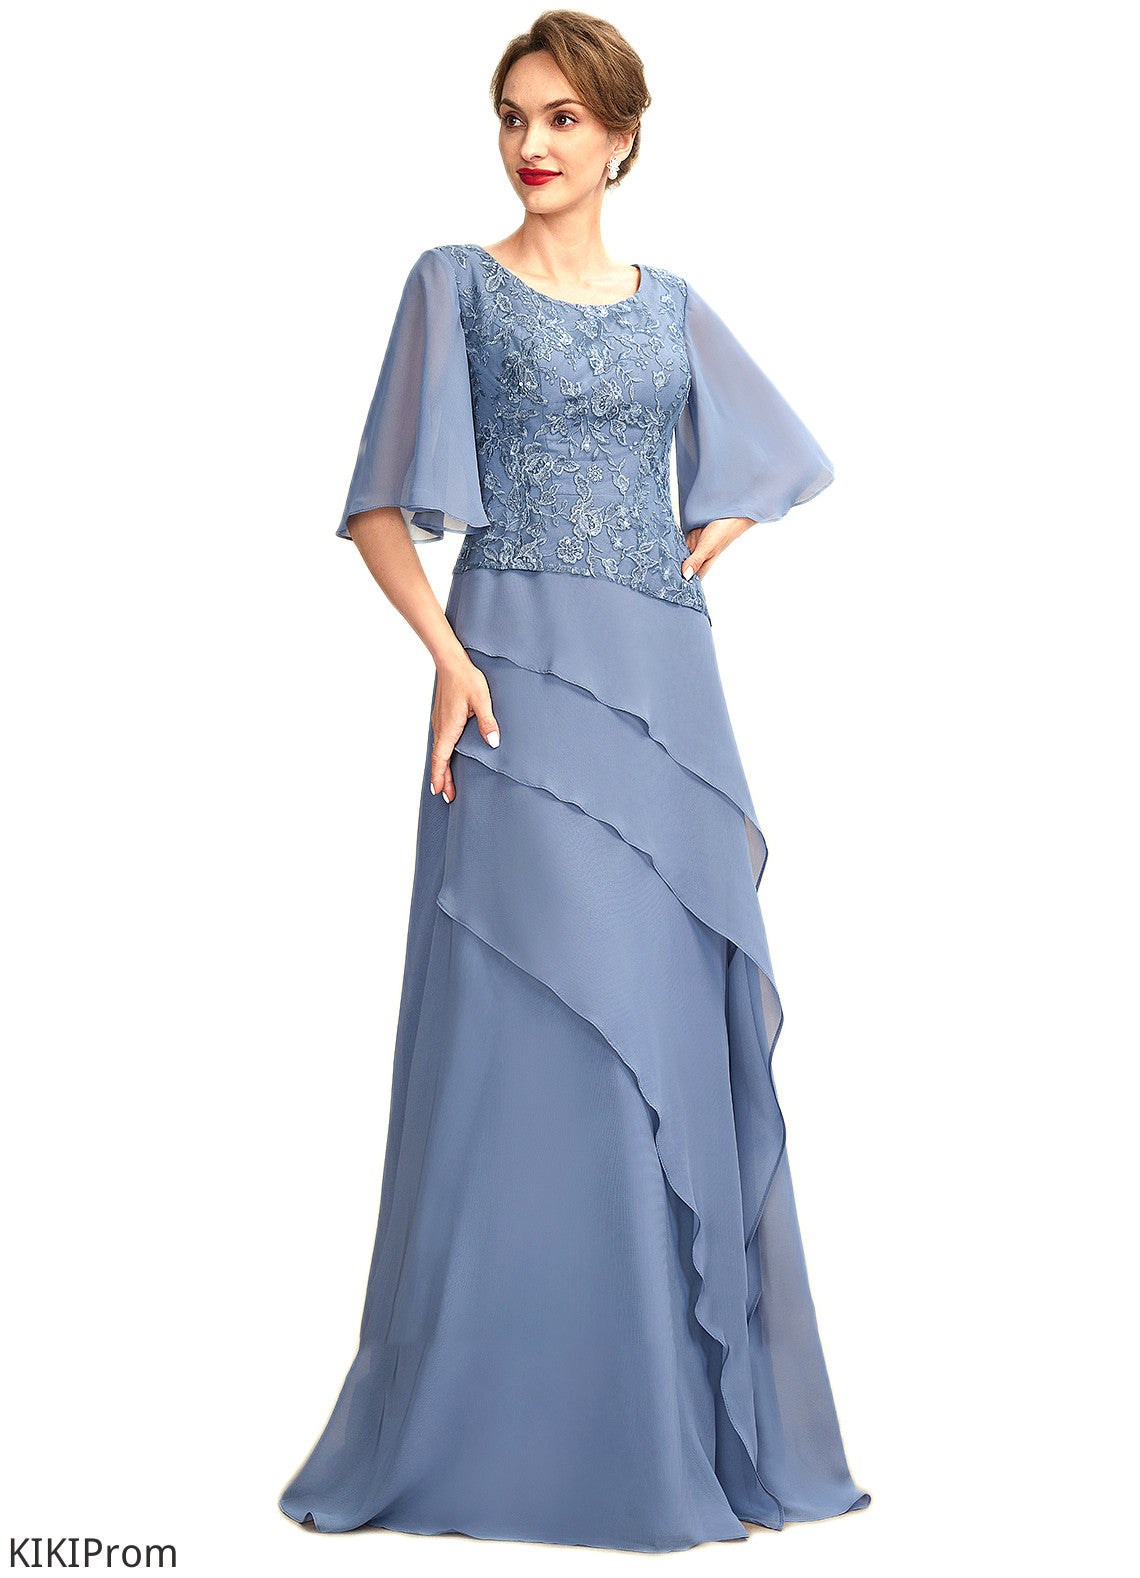 Logan A-Line Scoop Neck Floor-Length Chiffon Lace Mother of the Bride Dress With Sequins Cascading Ruffles DZ126P0014997